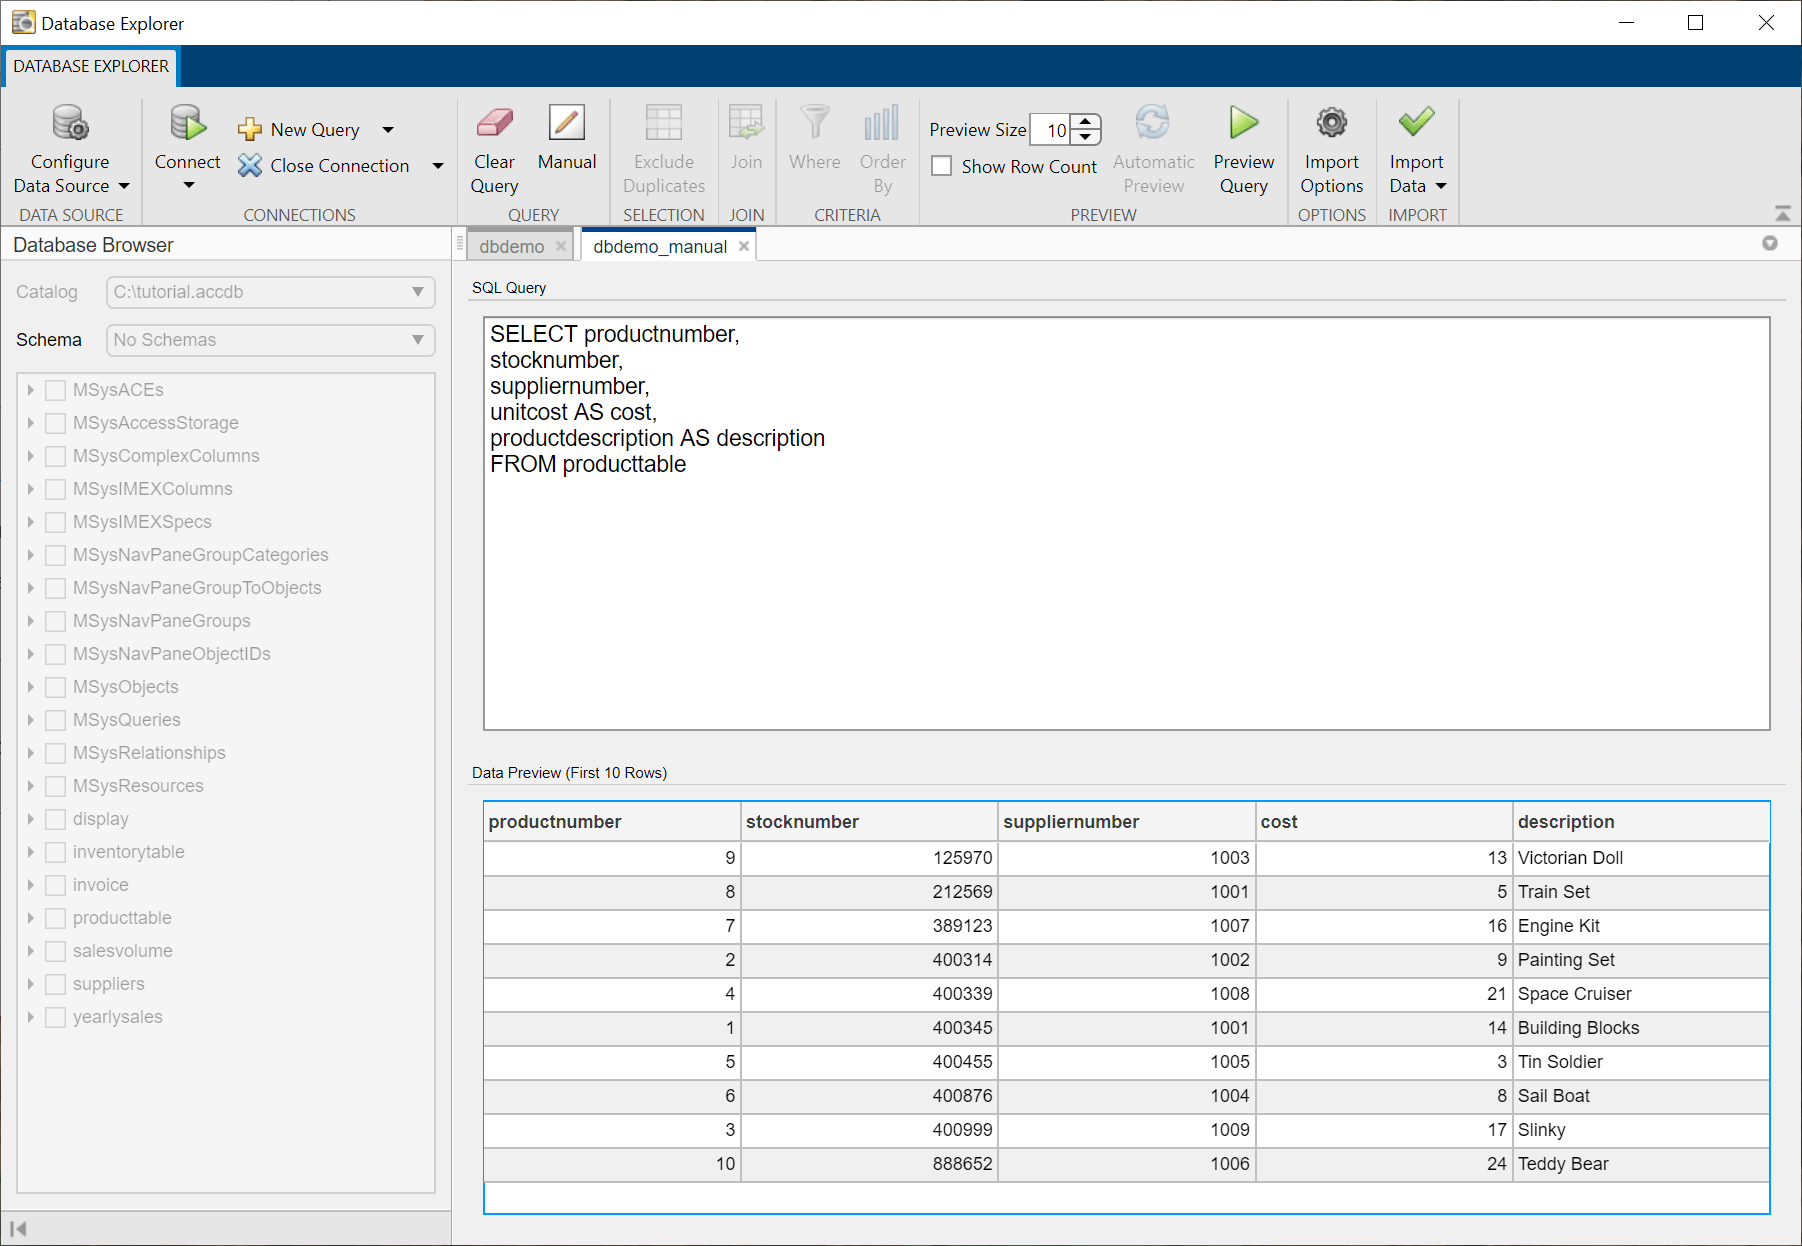 The Data Preview pane displays the first 10 rows and the last two columns are renamed cost and description.